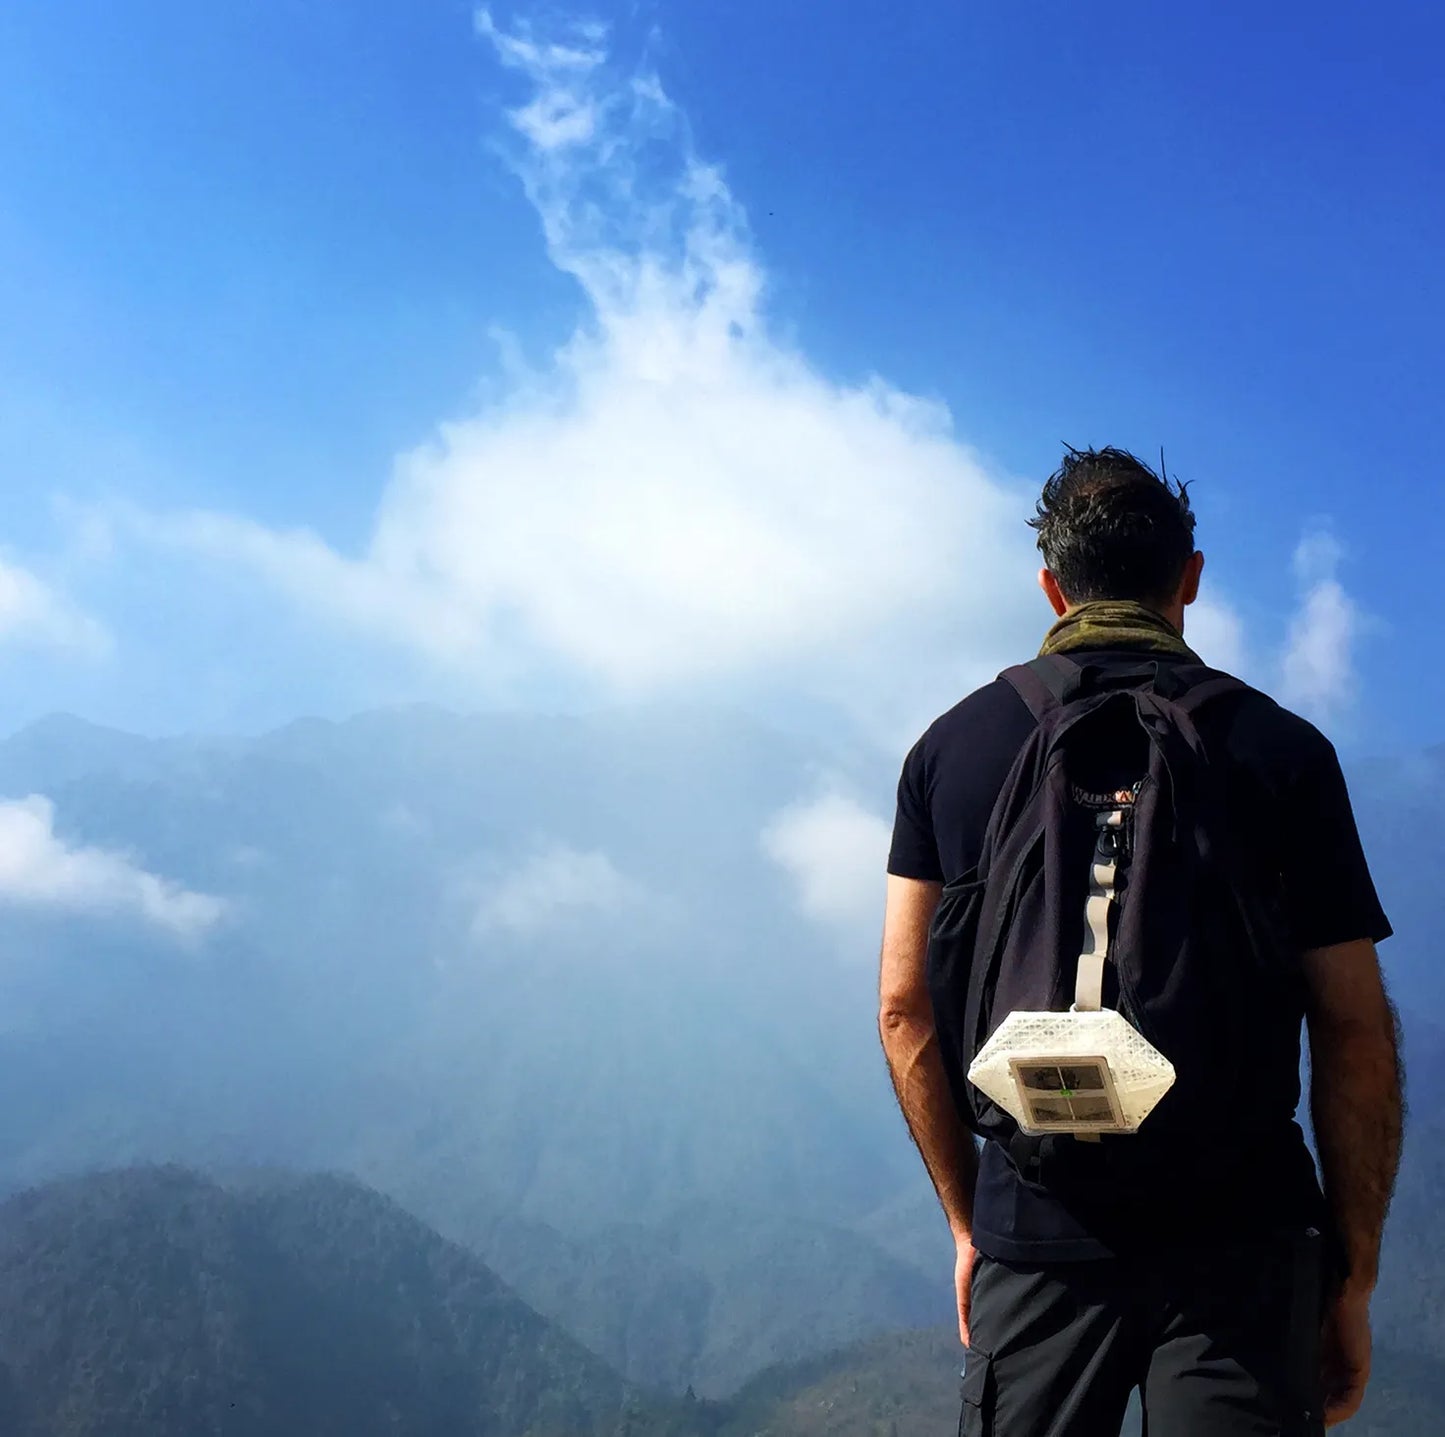 Man with backpack and a lantern attached looking at mountains.